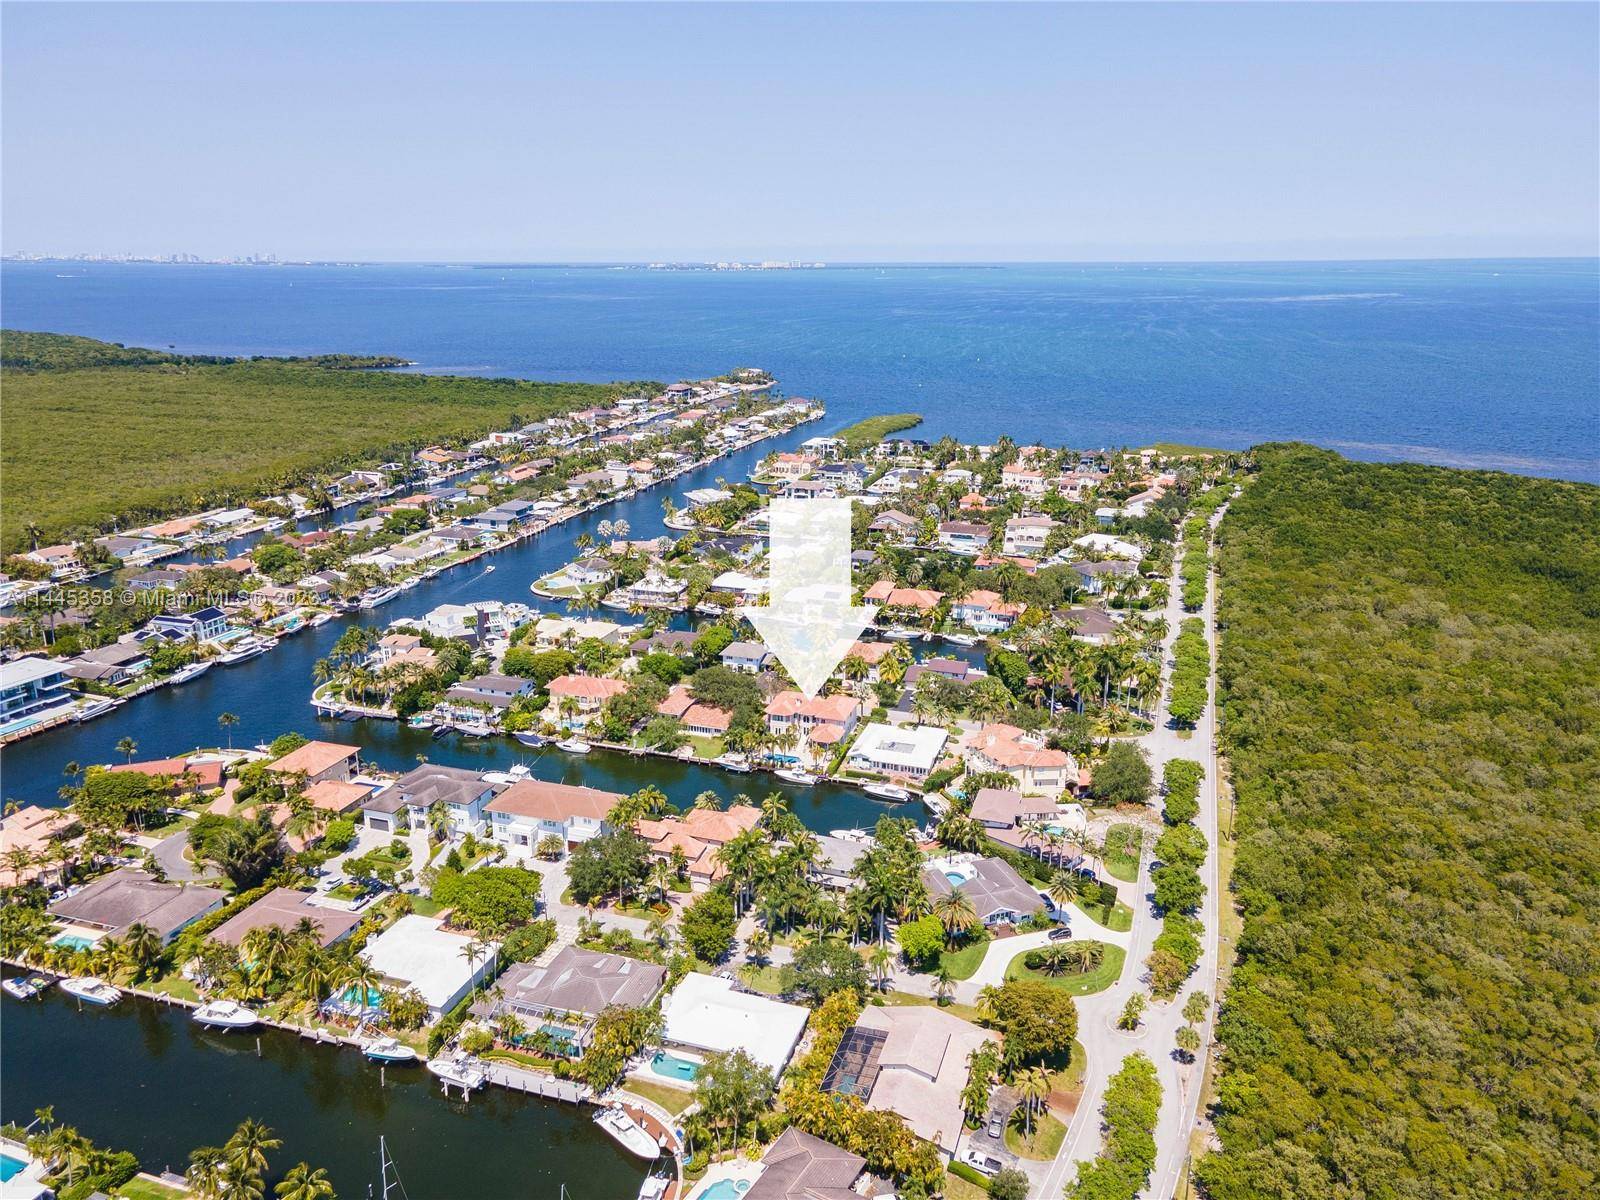 2002 construction luxury waterfront property in cul de sac street nestled in gated Gables by the Sea boasts 100' direct ocean access.